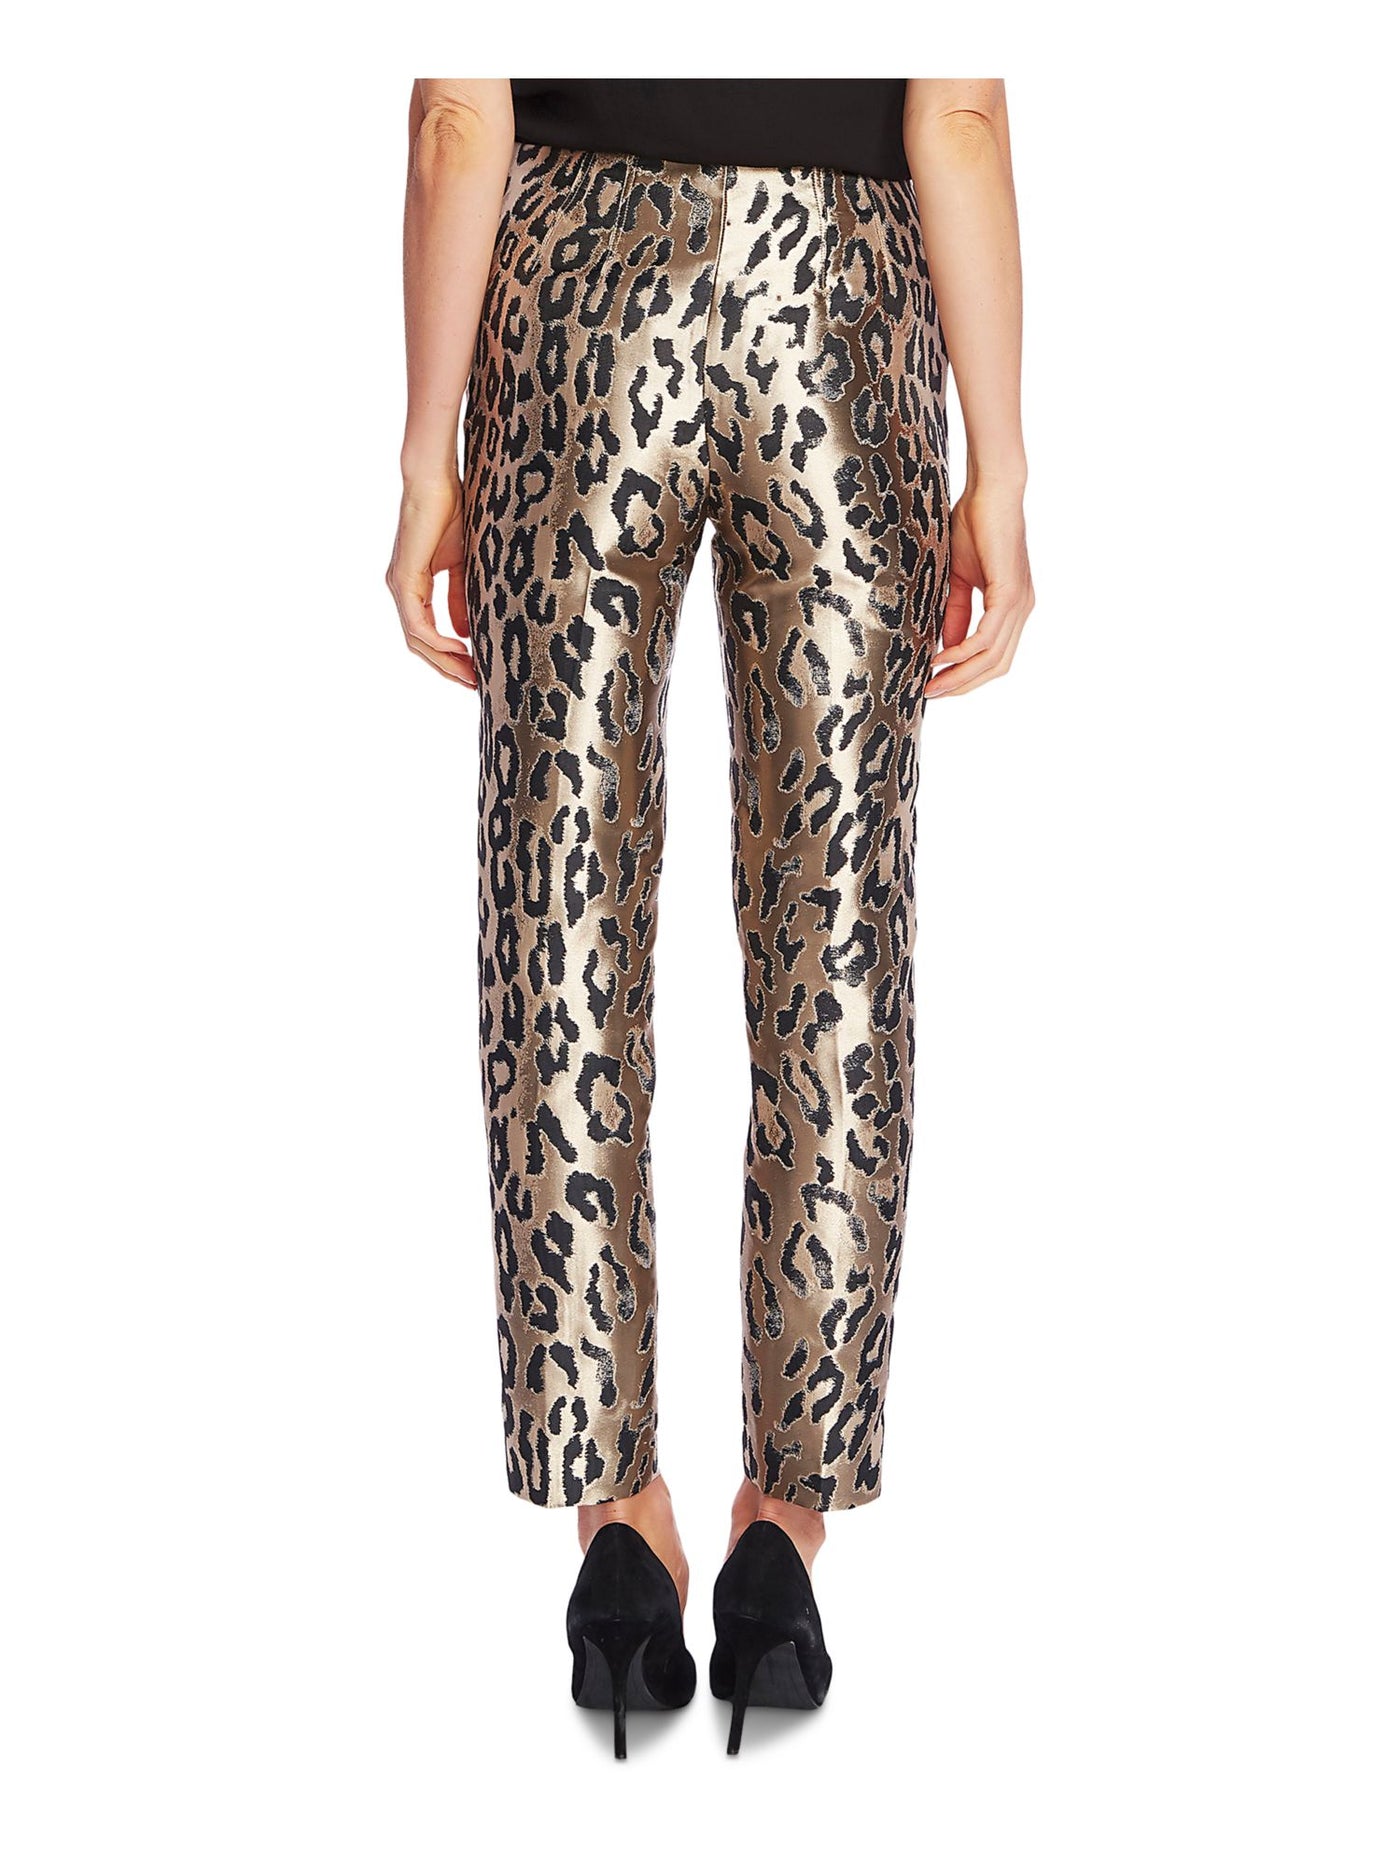 VINCE CAMUTO Womens Beige Animal Print Party Straight leg Pants 0